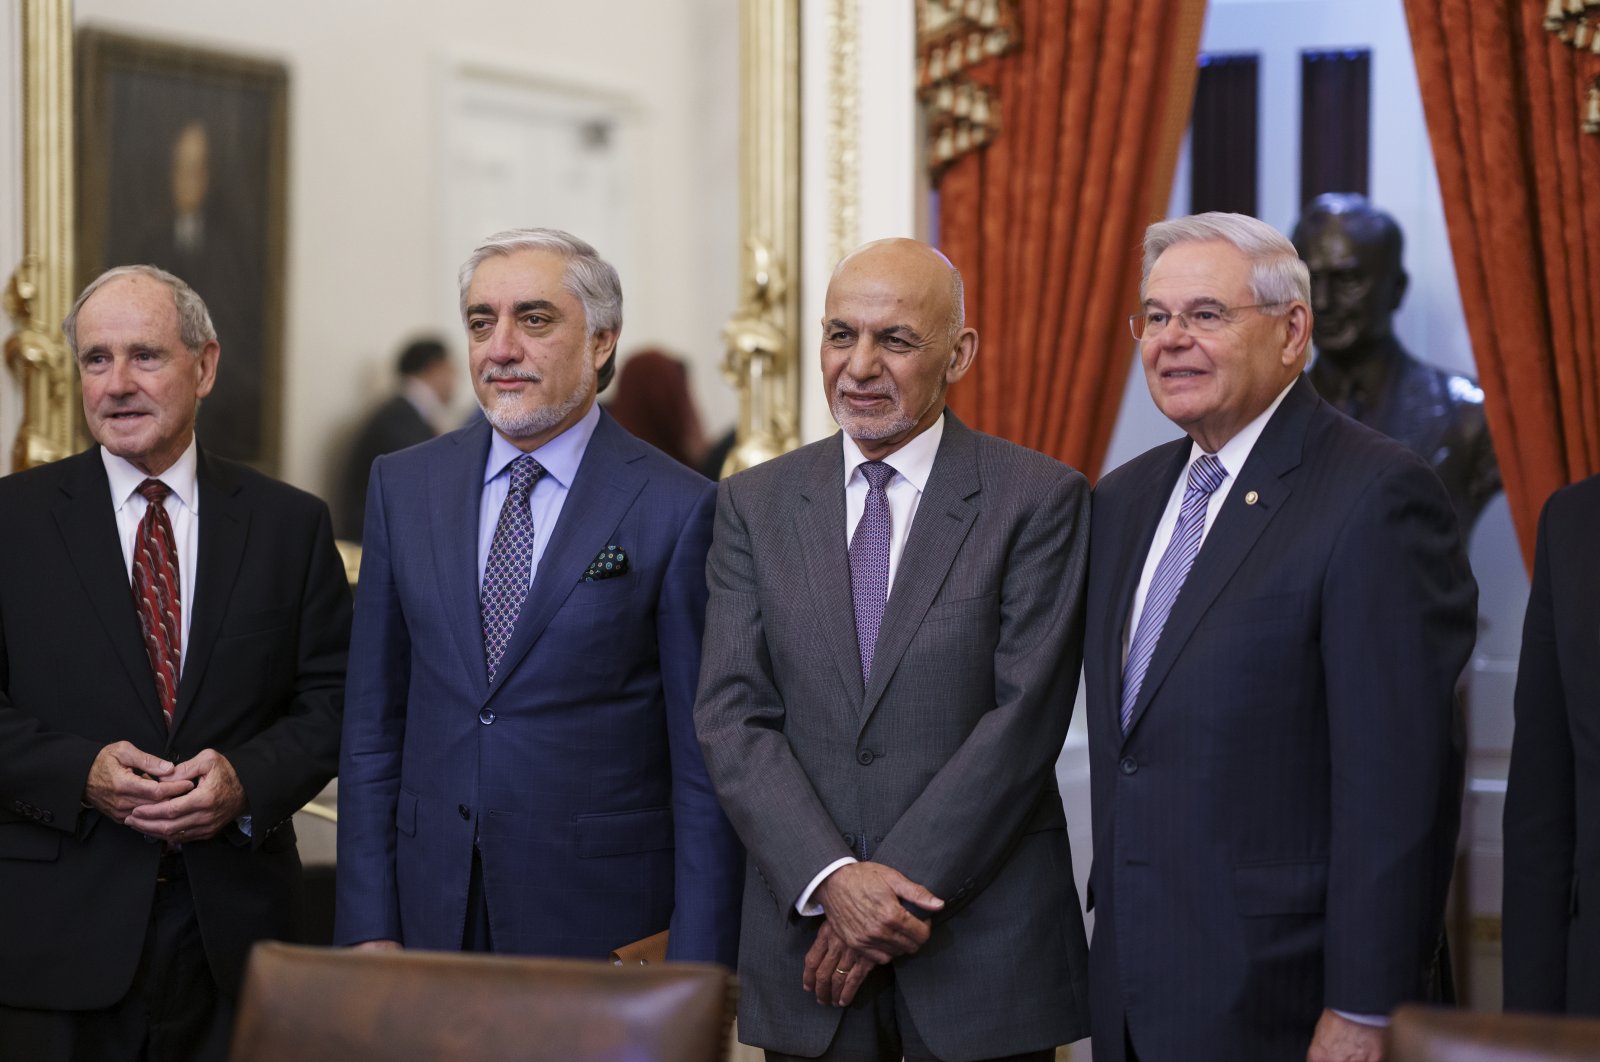 From left, Sen. Jim Risch, R-Idaho, Abdullah Abdullah who leads the High Council for National Reconciliation in Afghanistan, Afghan President Ashraf Ghani, and Sen. Bob Menendez, D-N.J., chair of the Senate Foreign Relations Committee, meet at the Capitol in Washington, D.C., U.S., June 23, 2021. (AP Photo)